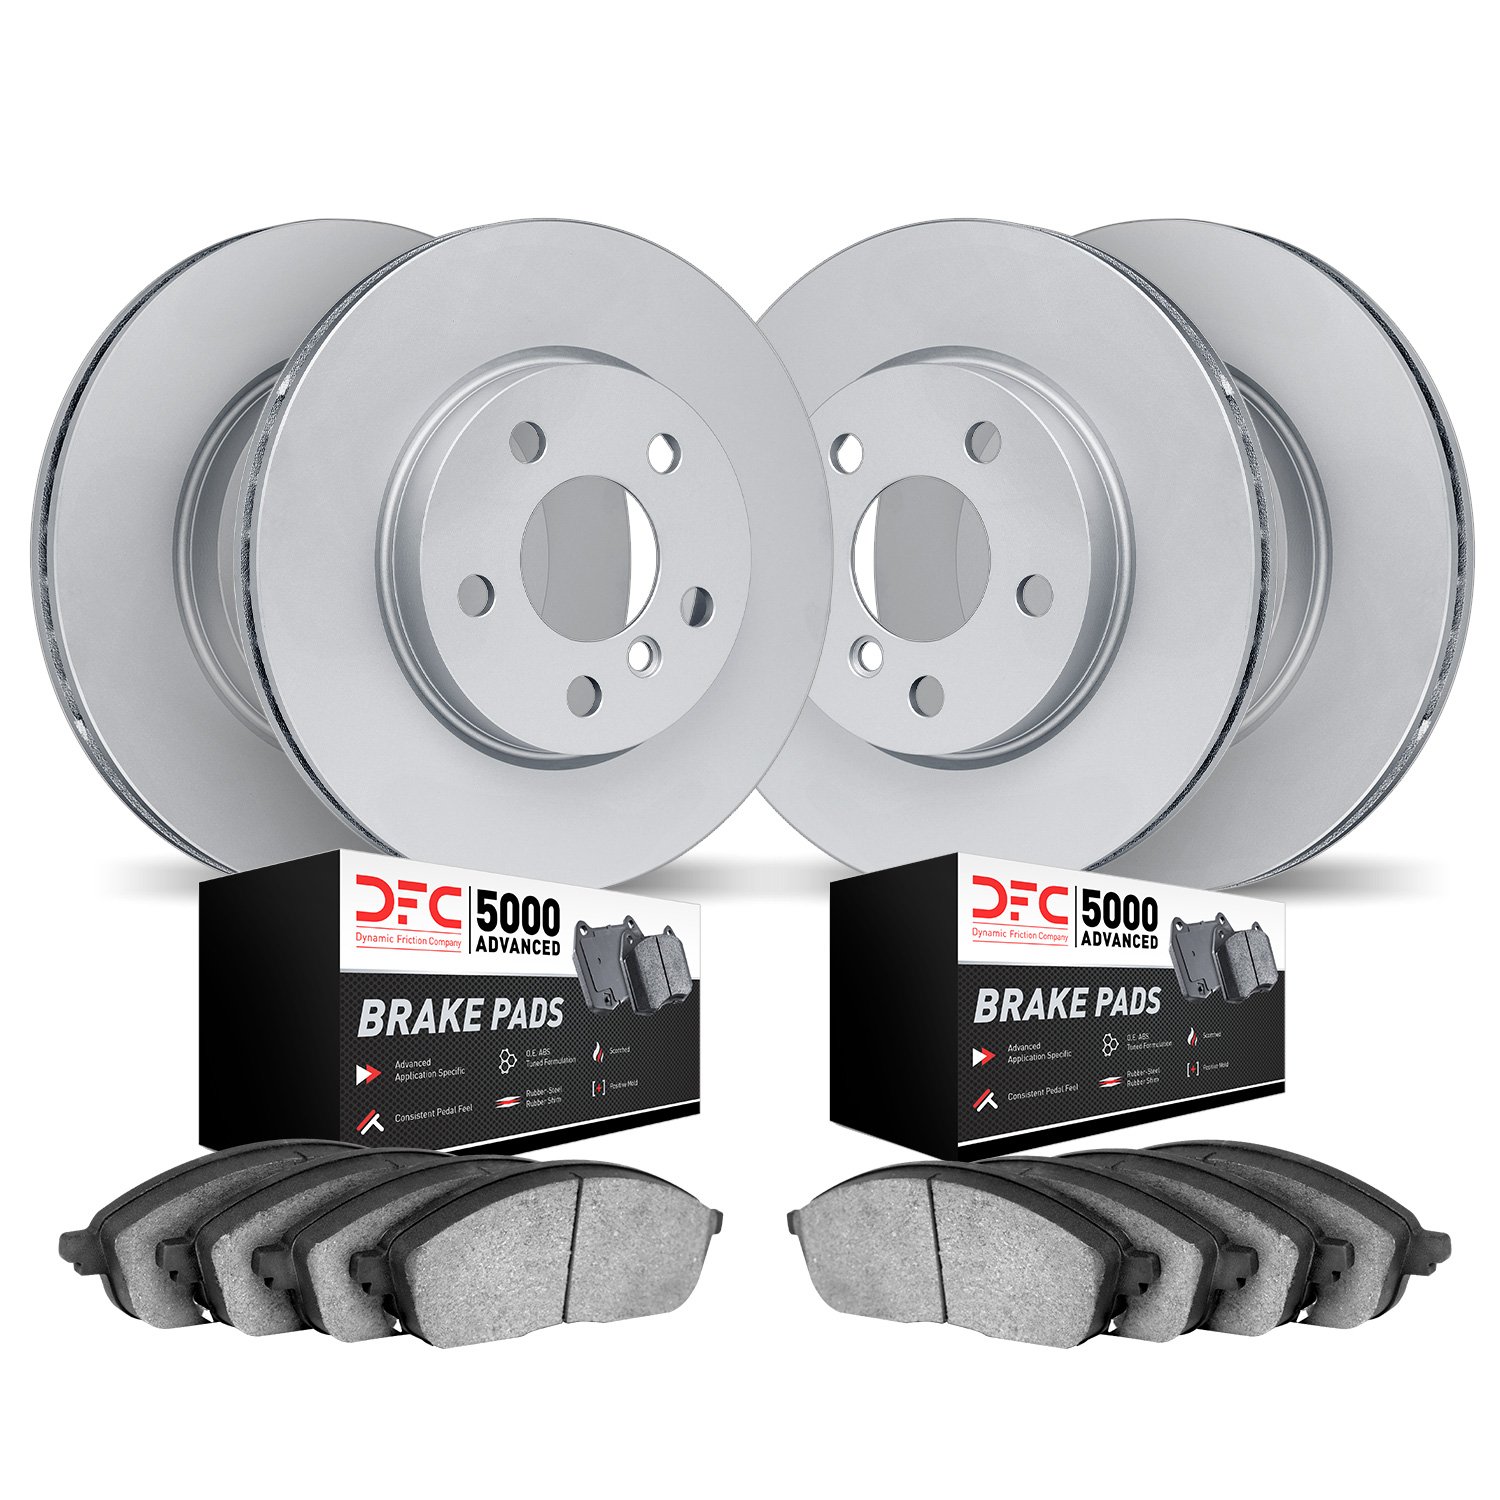 9504-63194 GEOMET Brake Rotors w/5000 Advanced Brake Pads Kit, Fits Select Mercedes-Benz, Position: Front and Rear